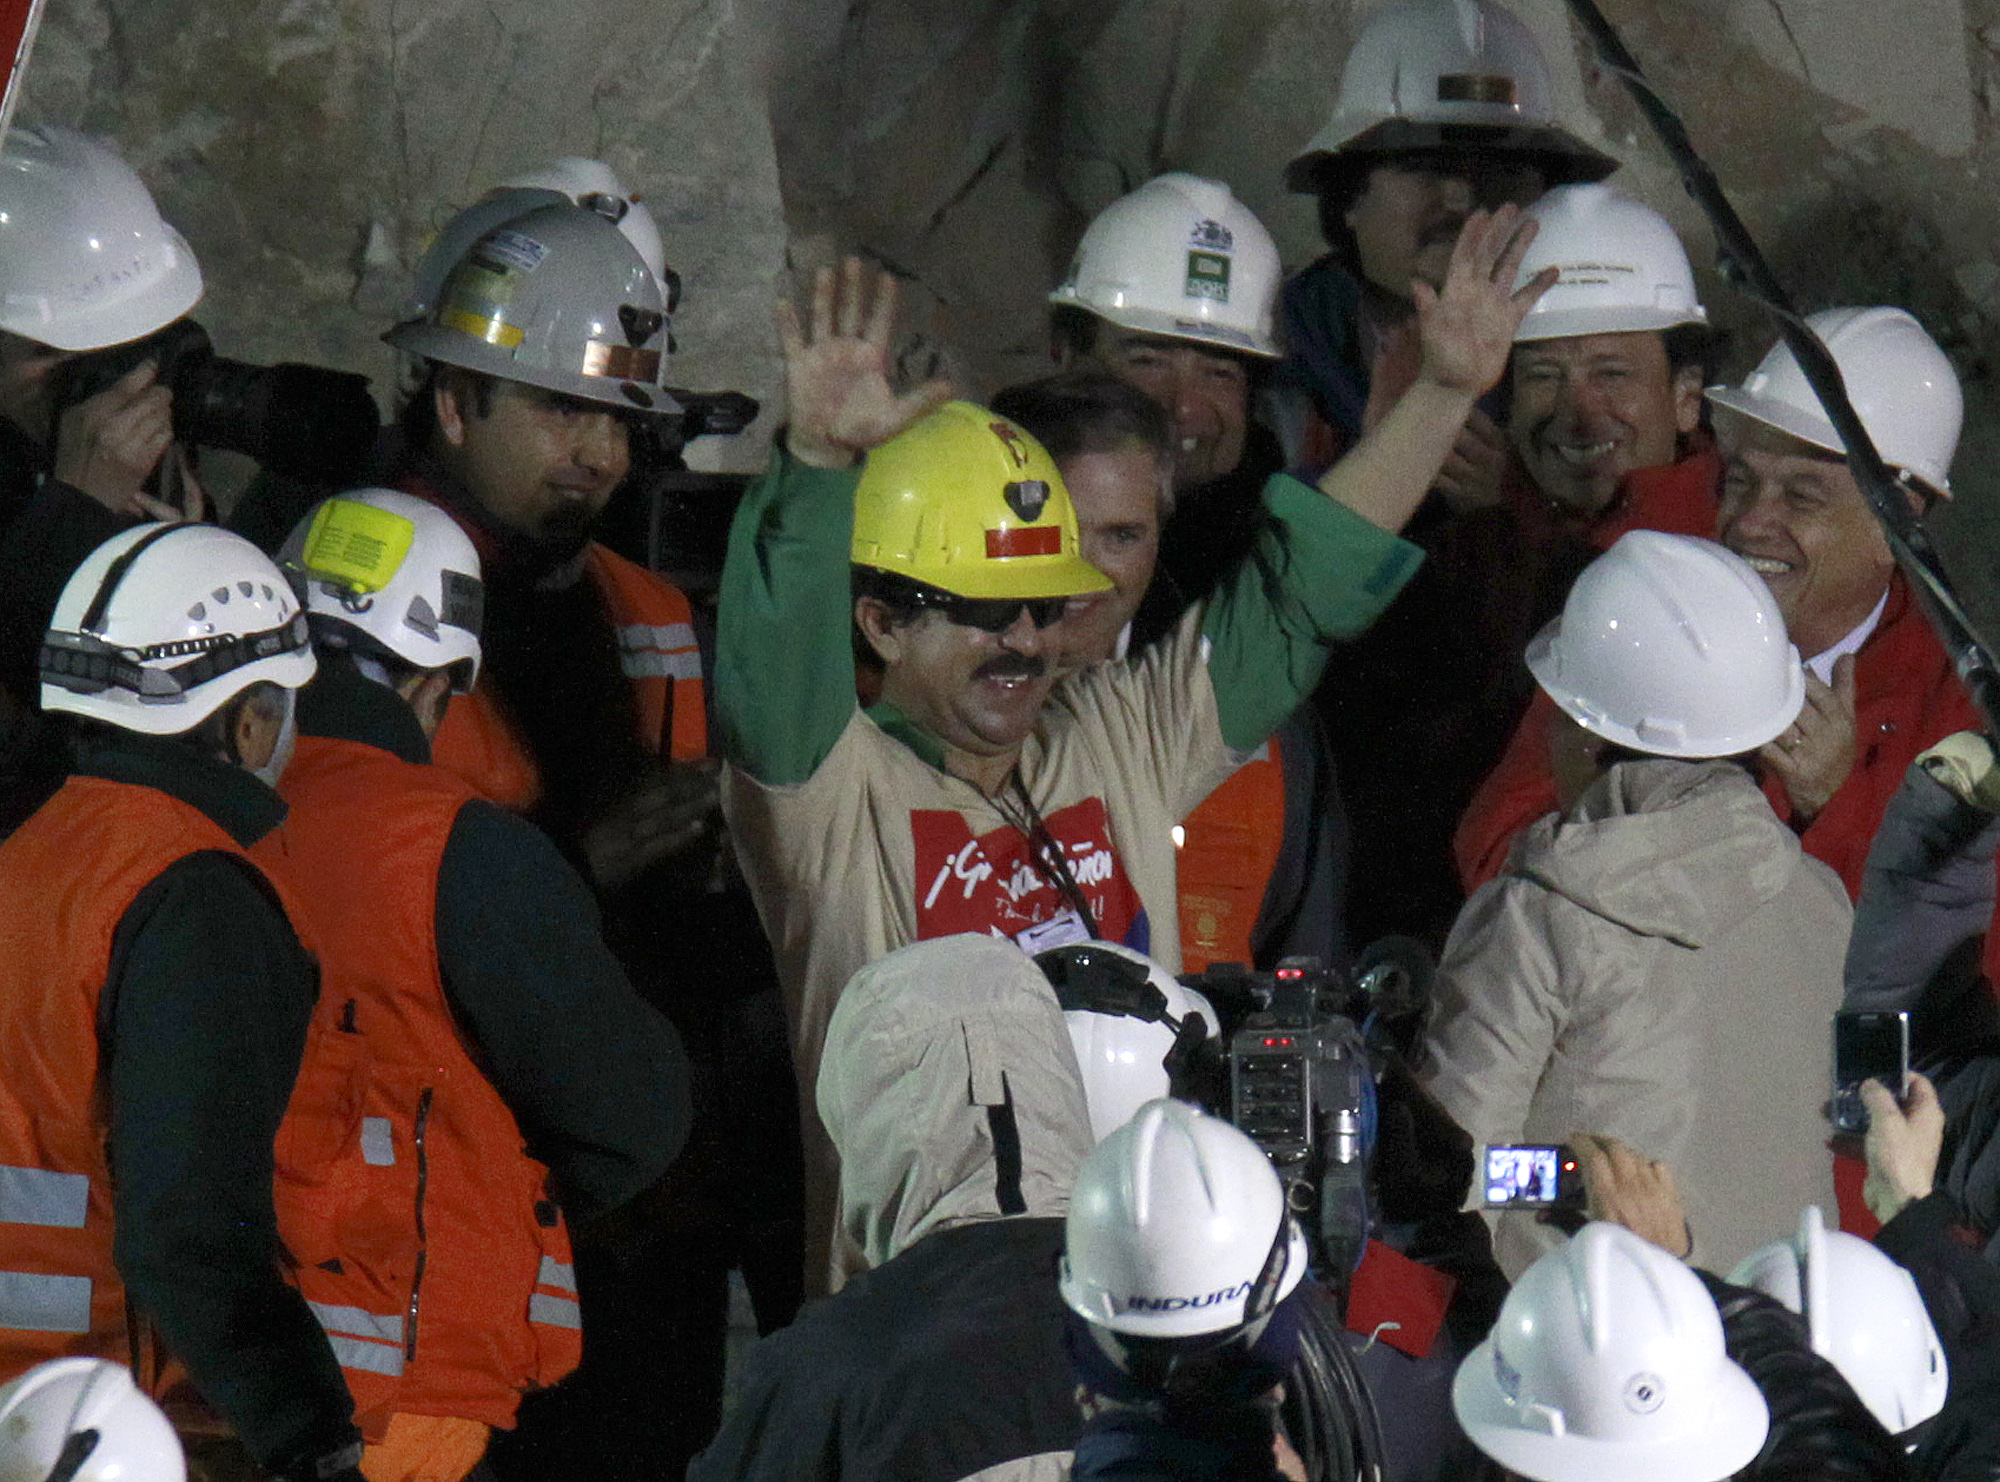 Miner Juan Andres Illanes Palma salutes after being rescued from the collapsed San Jose gold and copper mine near Copiapo, Chile on Oct. 13, 2010. (Roberto Candia—AP)